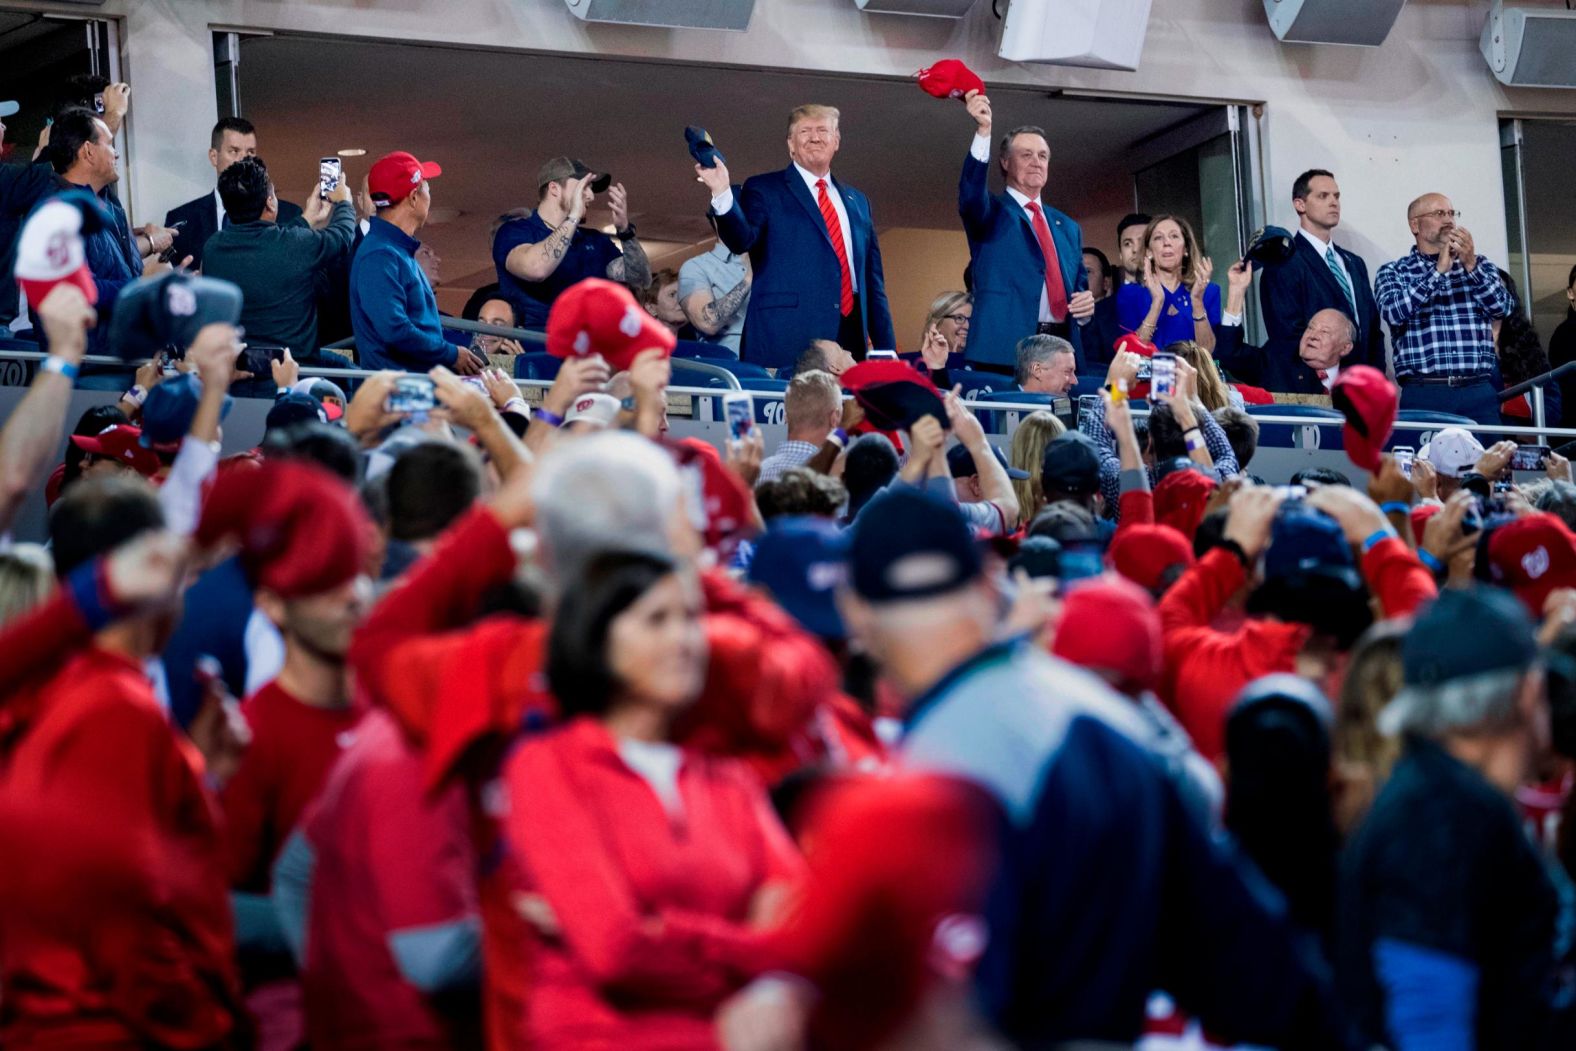 US President Donald Trump attended Game 5 in Washington. He received some cheers as he appeared on the video screen, but <a href="index.php?page=&url=https%3A%2F%2Fwww.cnn.com%2F2019%2F10%2F27%2Fpolitics%2Fdonald-trump-melania-world-series-nationals-astros%2Findex.html" target="_blank">he was also booed loudly.</a> There were later chants of "lock him up."